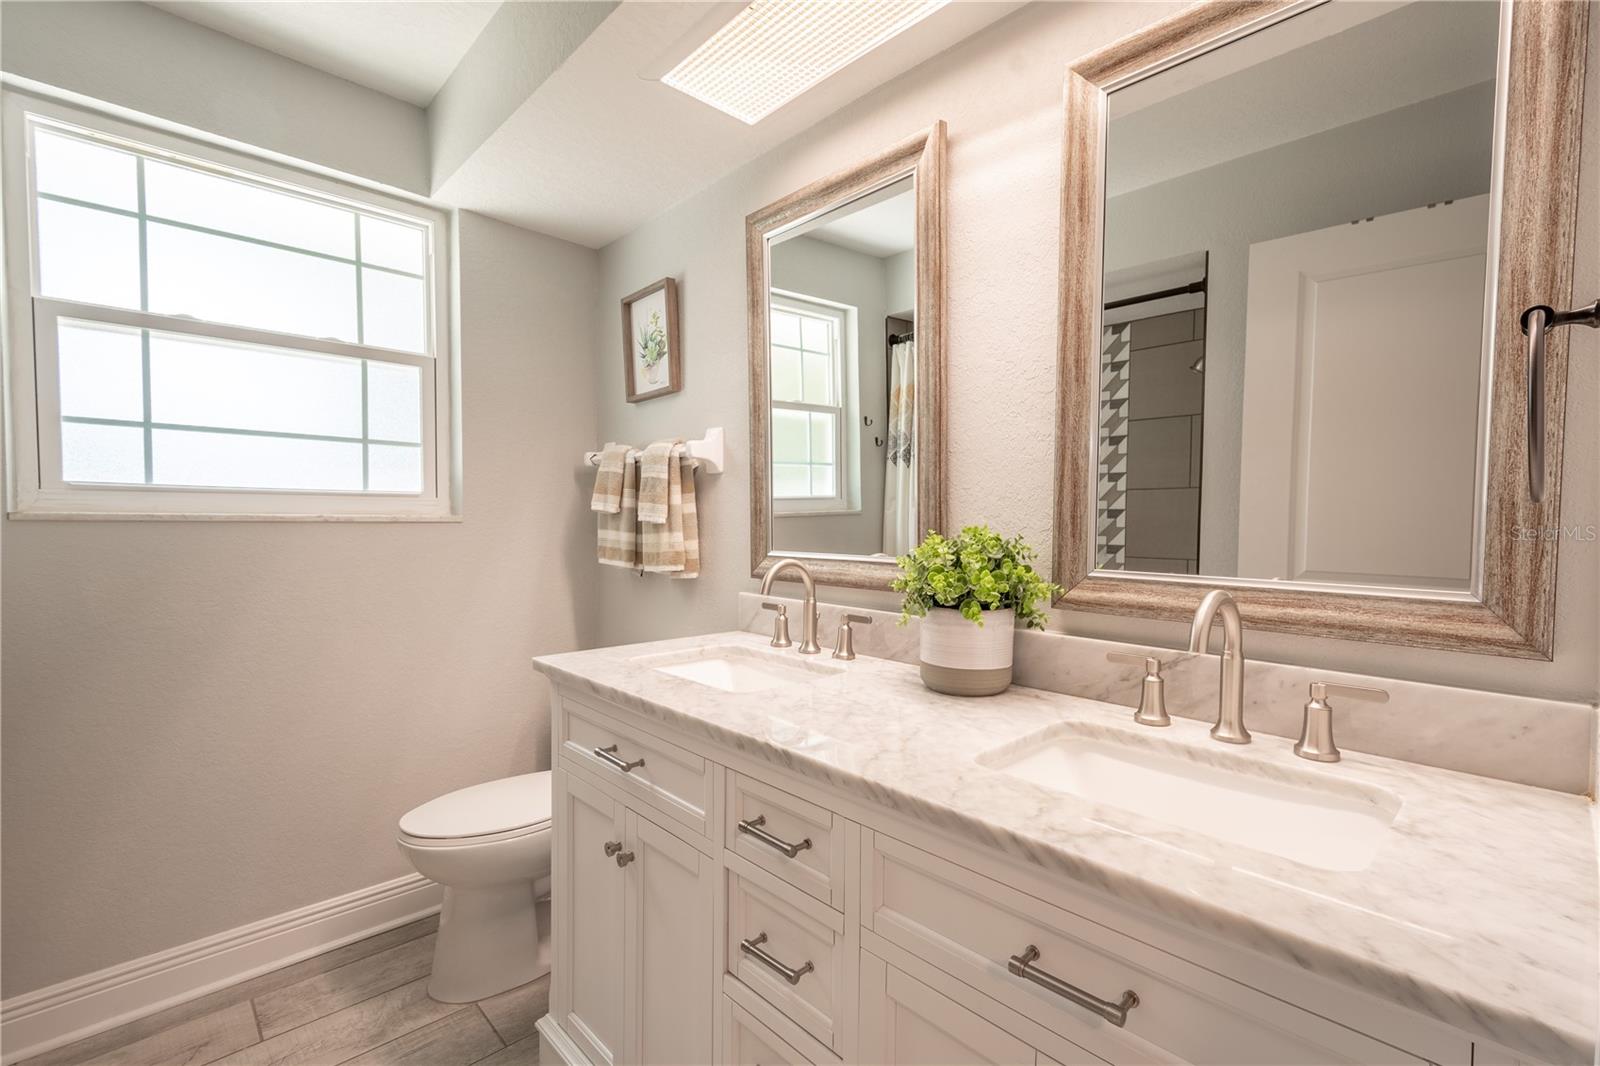 The upstairs full bath features a dual sink mirrored vanity with stone counter top and ceramic tile flooring.